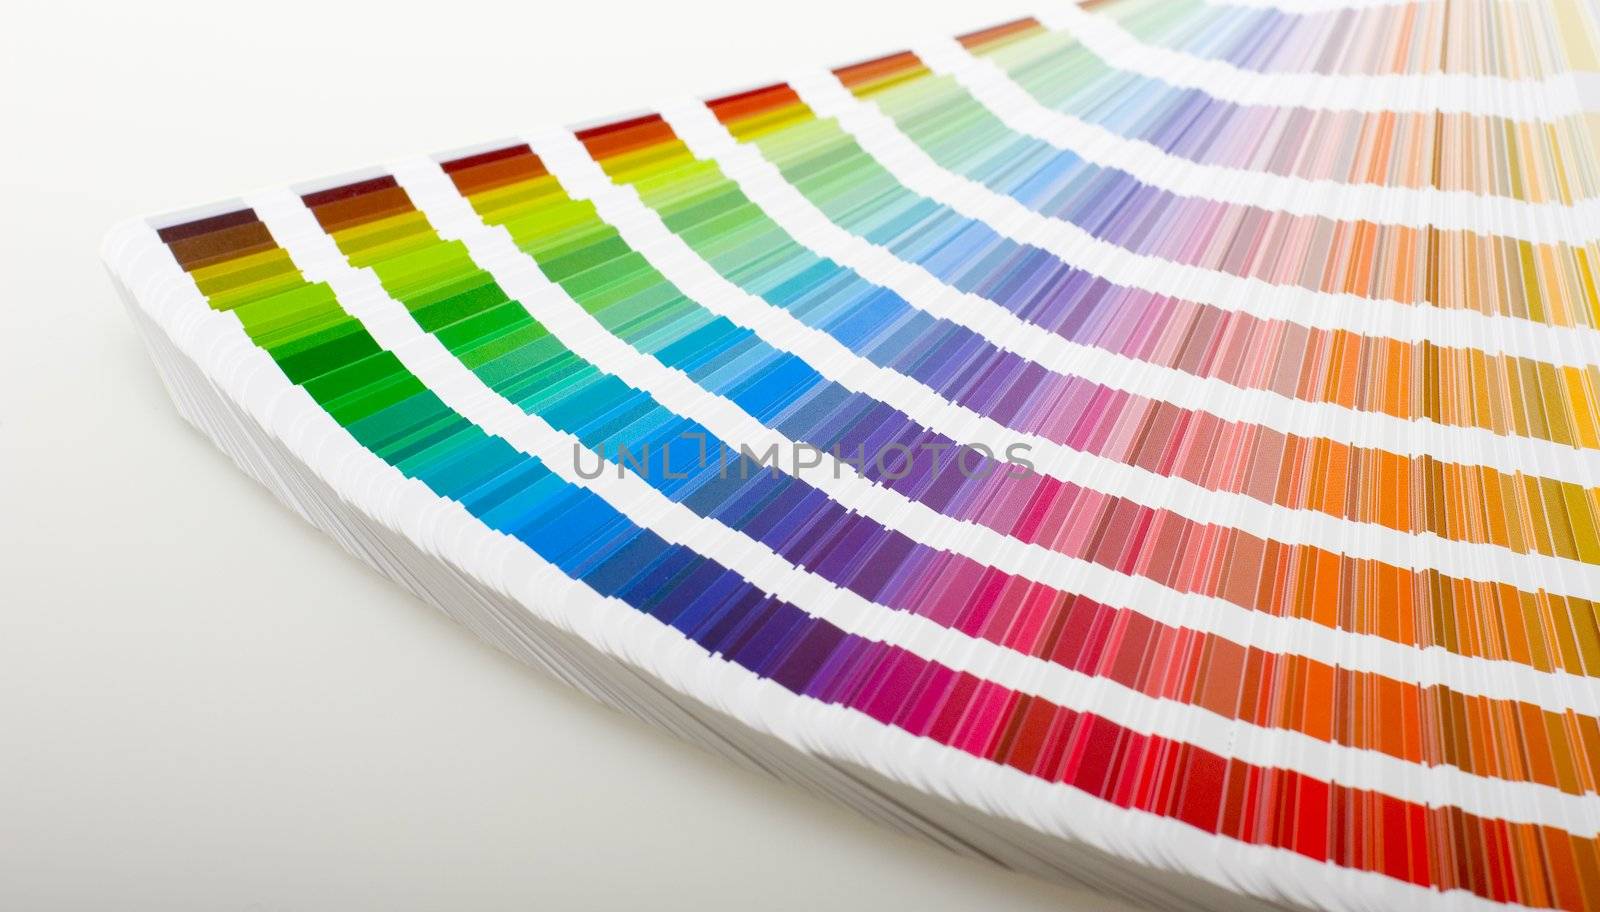 CMYK Swatches by Stocksnapper